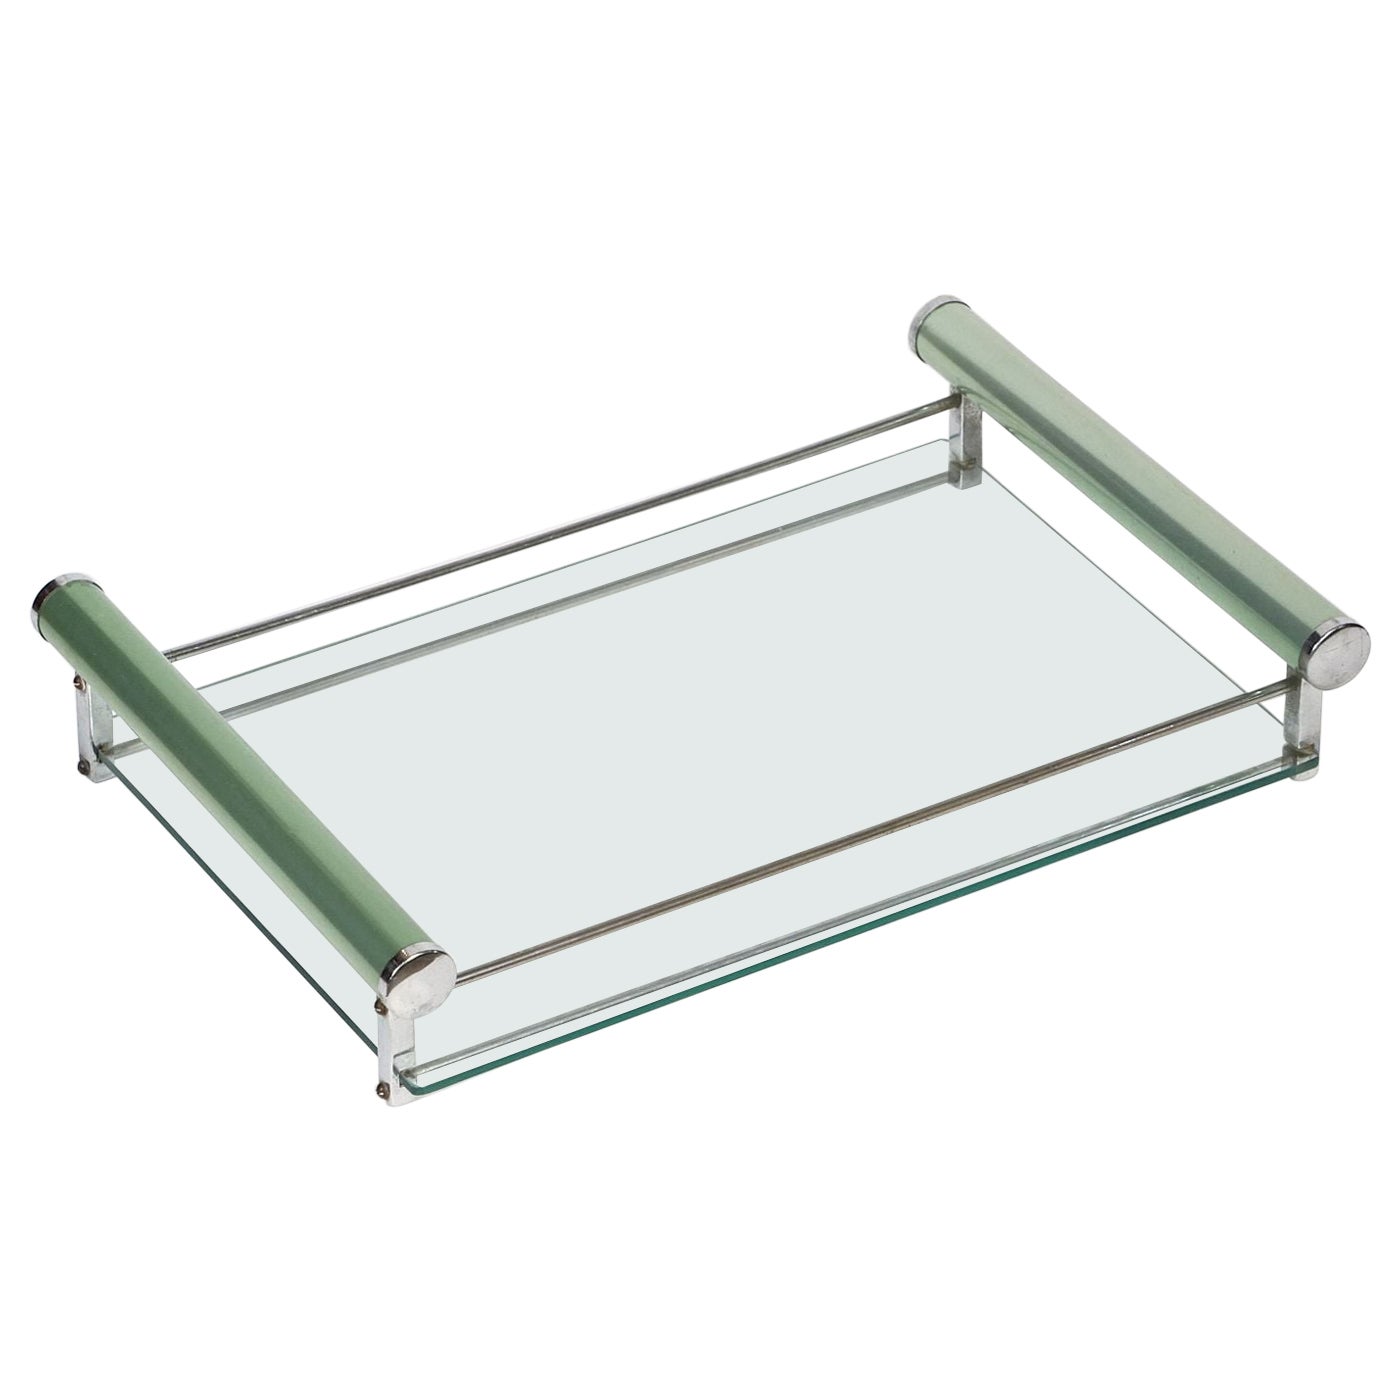 Art Deco Chrome and Glass Tray With Green Handles from England